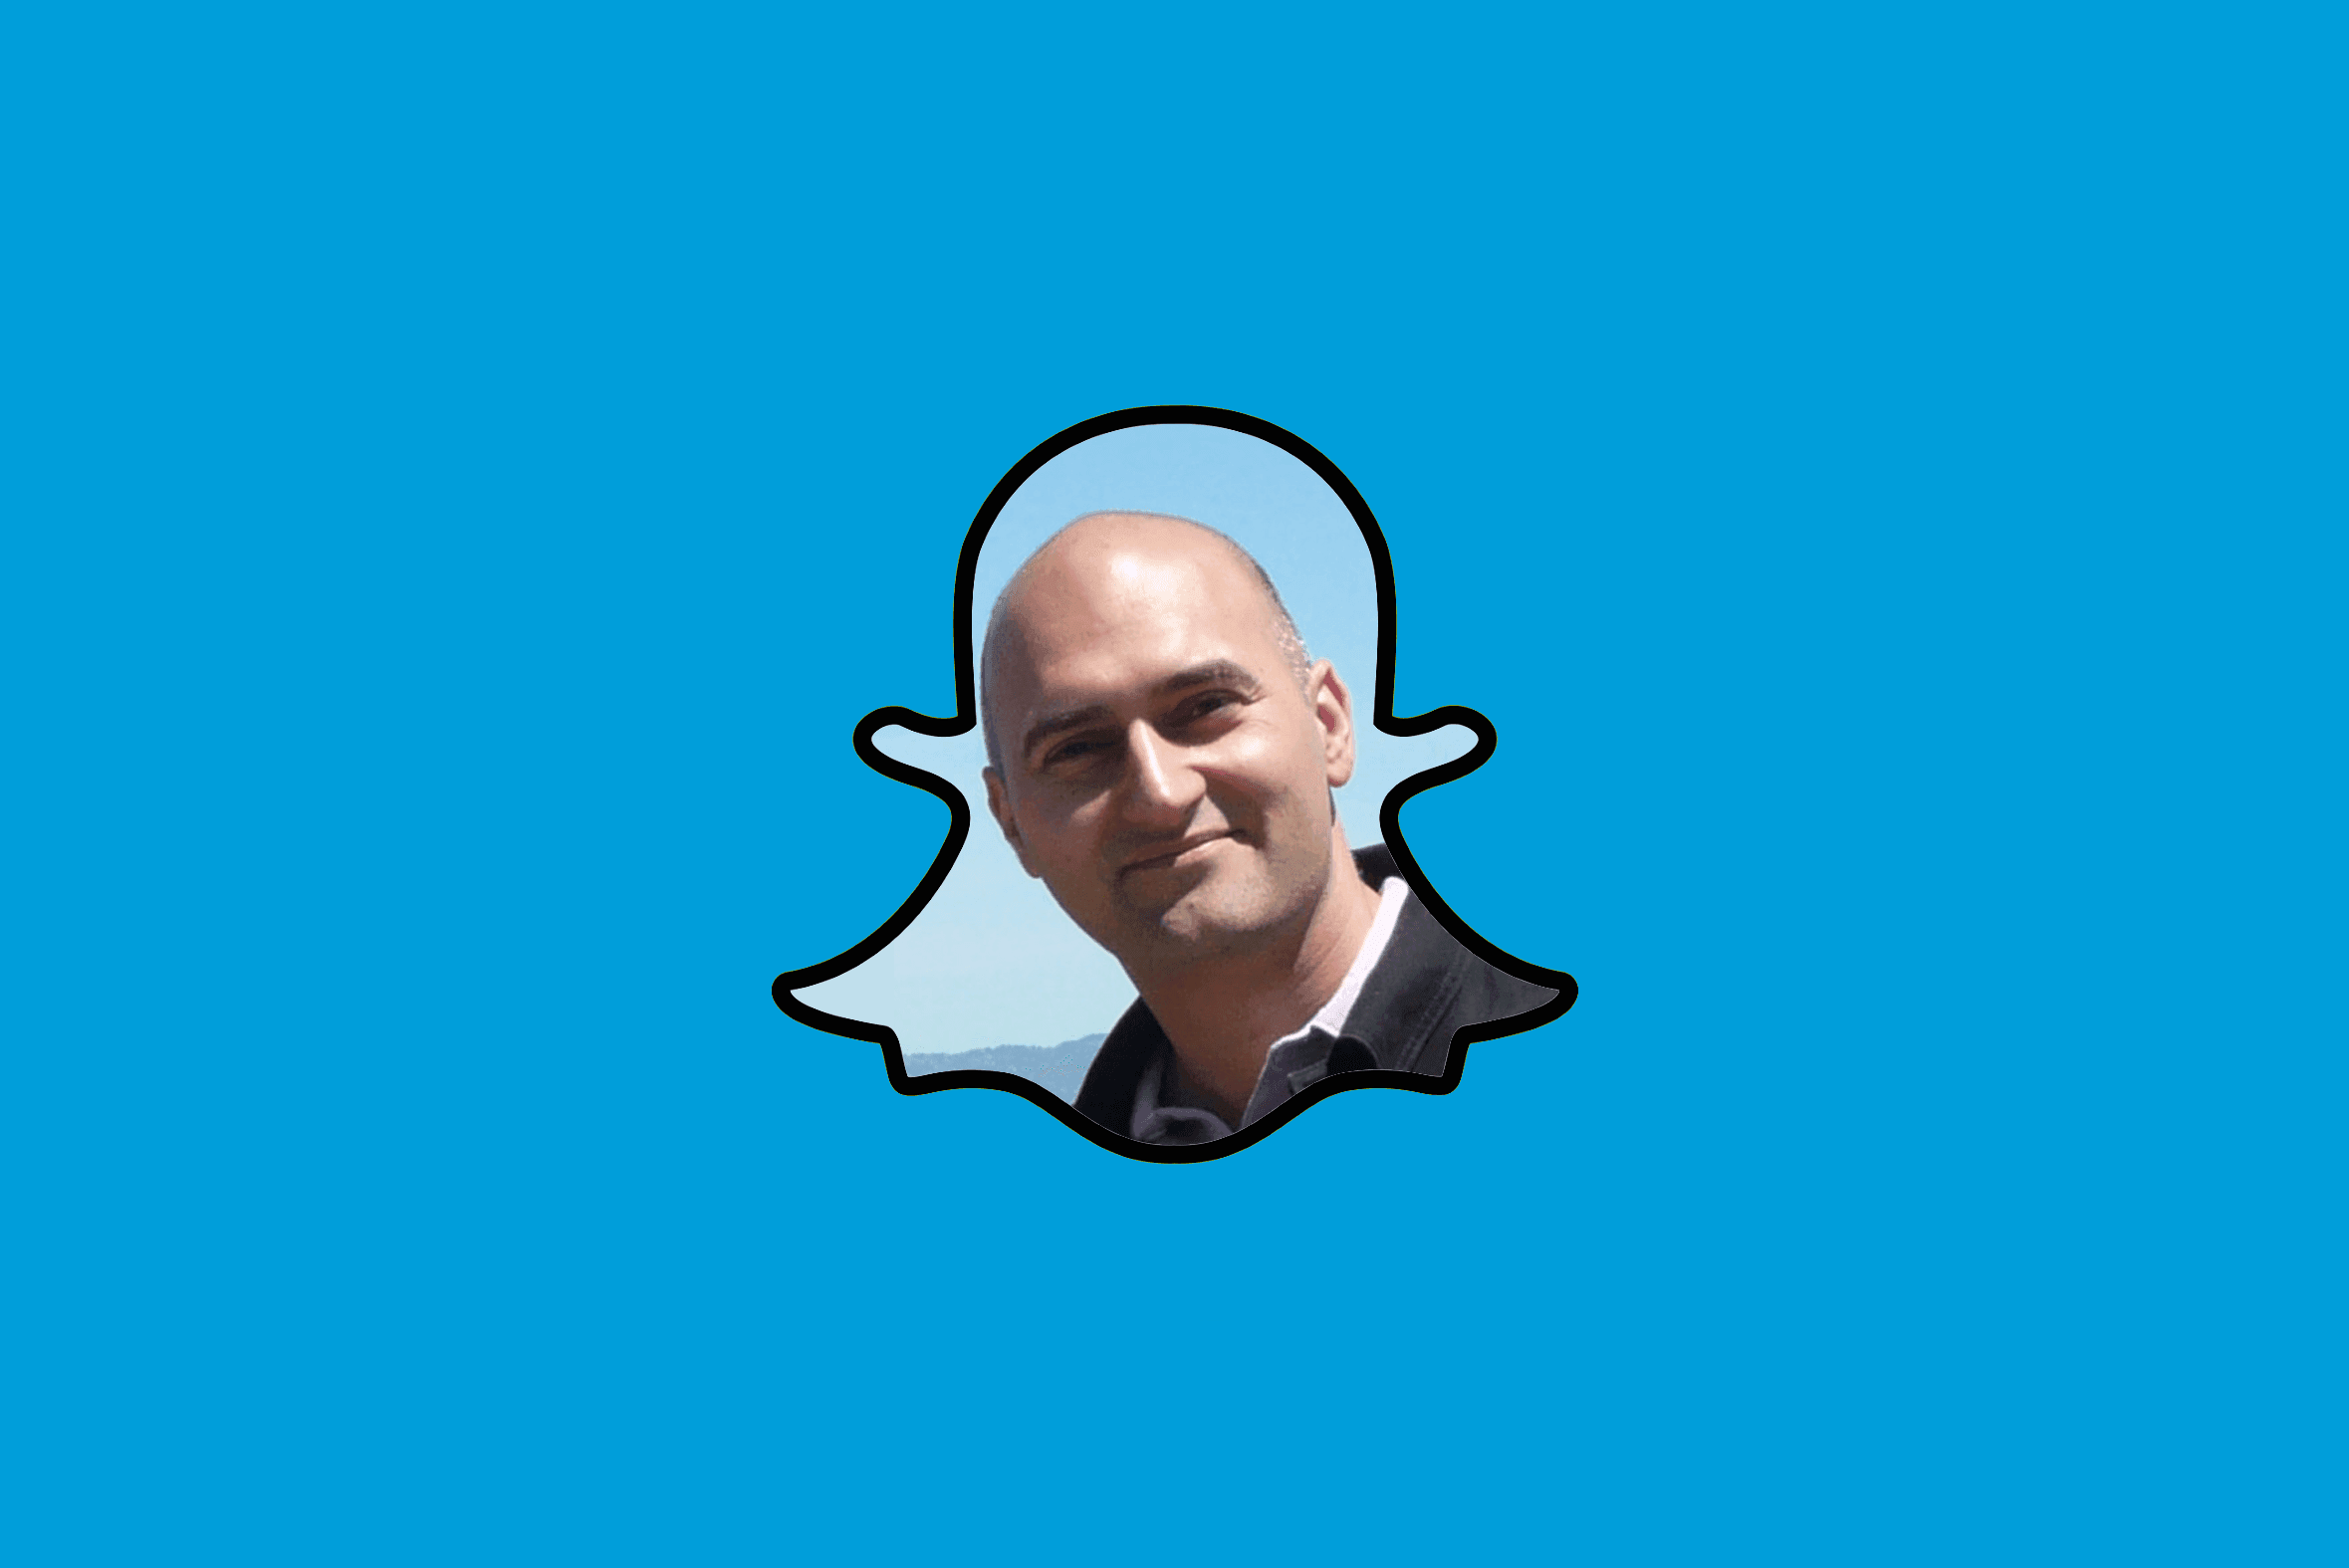 Snapchats Sina Sohangir explains what vanishing images can tell us about our behavior